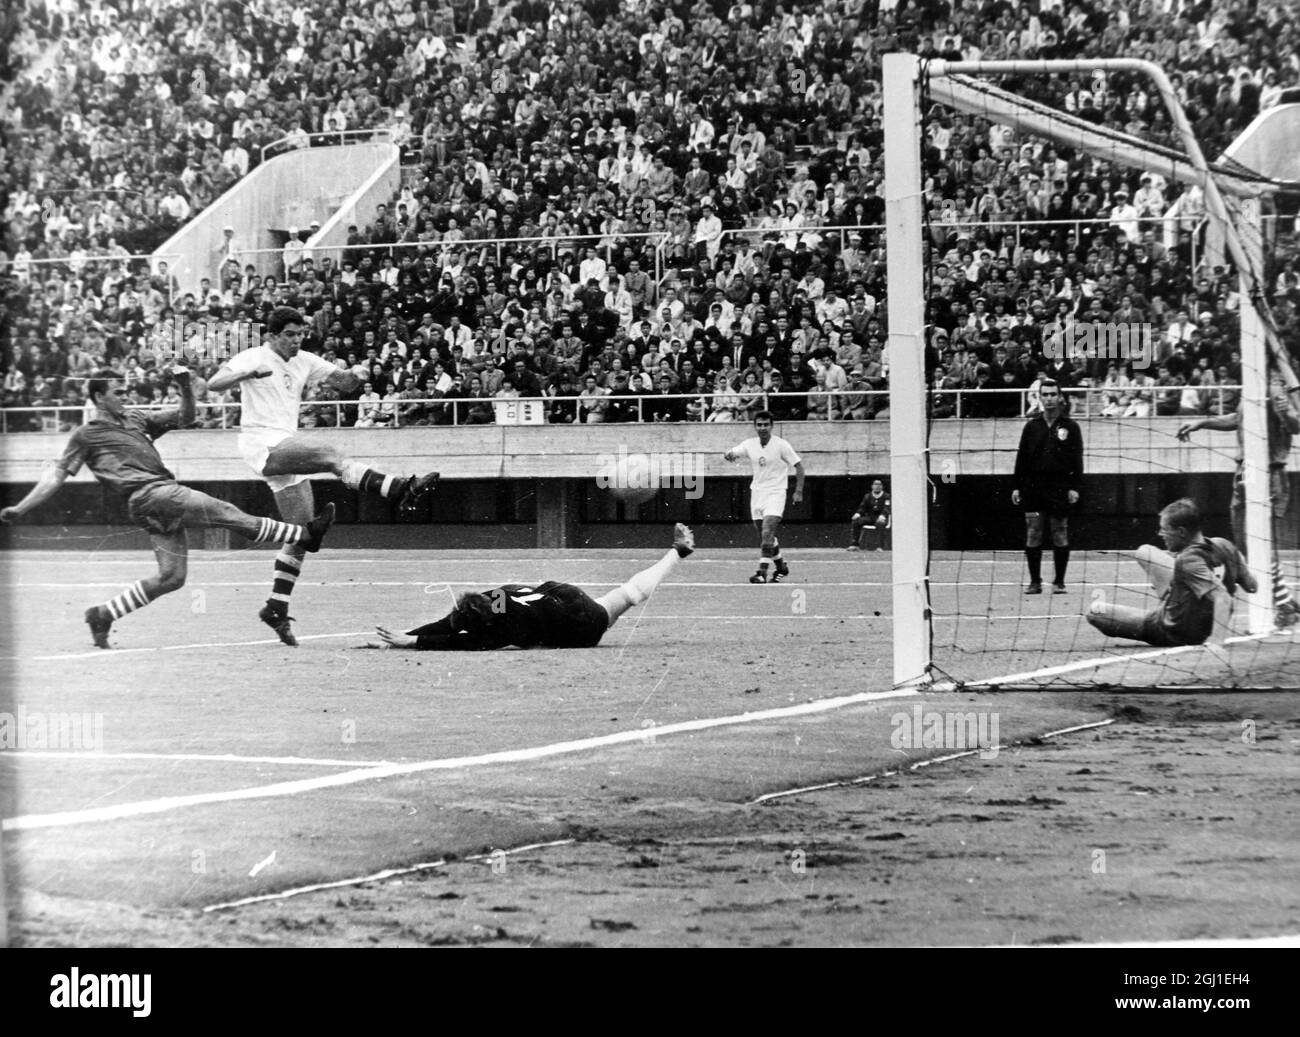 OLYMPICS, OLYMPIC SPORT GAMES - THE XVIII 18TH OLYMPIAD IN TOKYO, JAPAN - FOOTBALL IN ACTION CZECHOSLOVAKIA V GERMANY 2-1 ; 22 OCTOBER 1964 Stock Photo